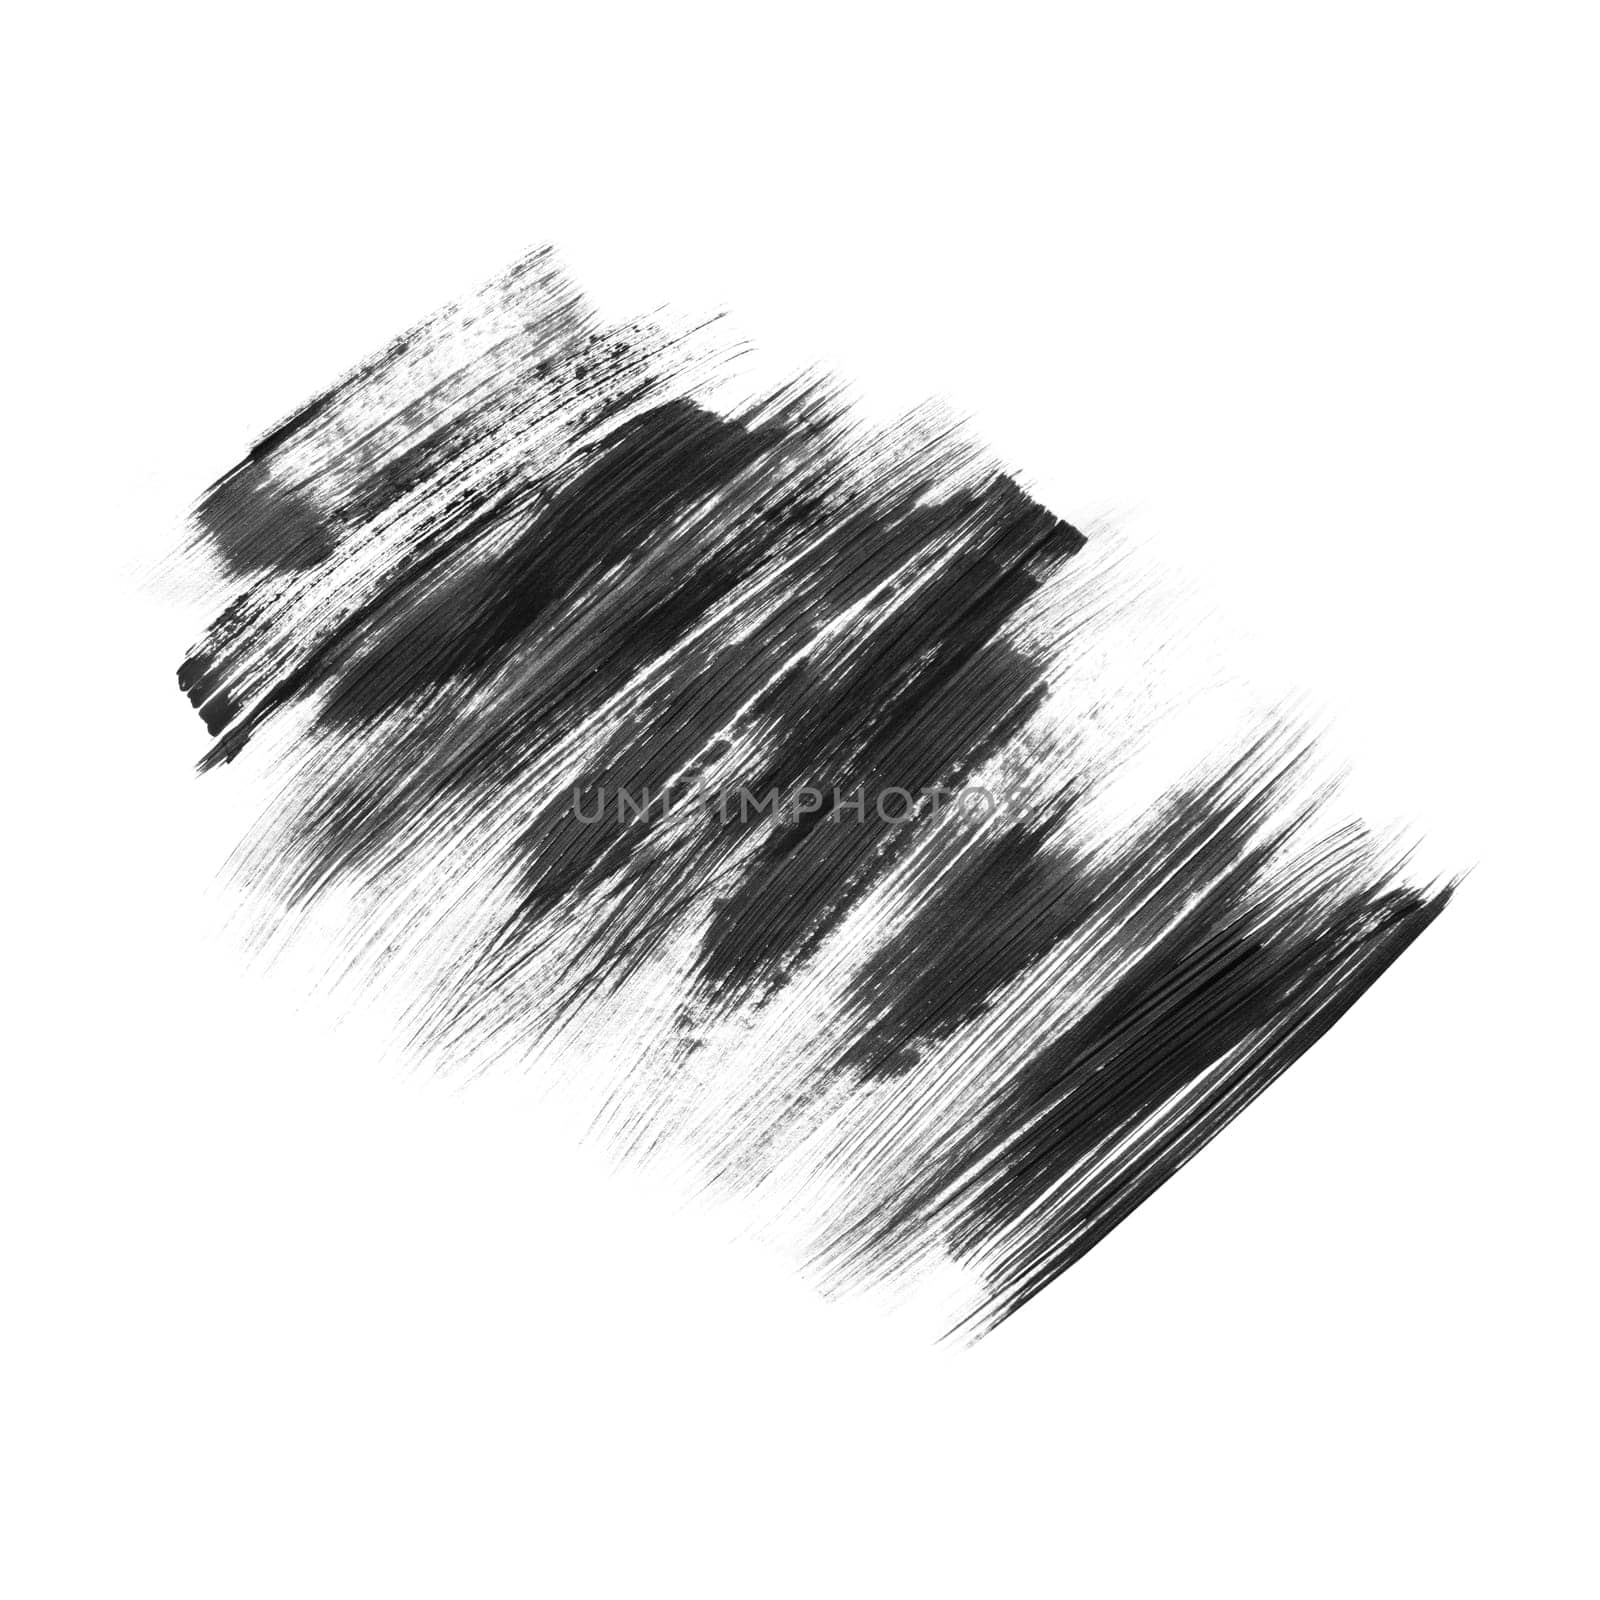 Black brush stroke isolated on a white background. Stock design element. by anna_artist